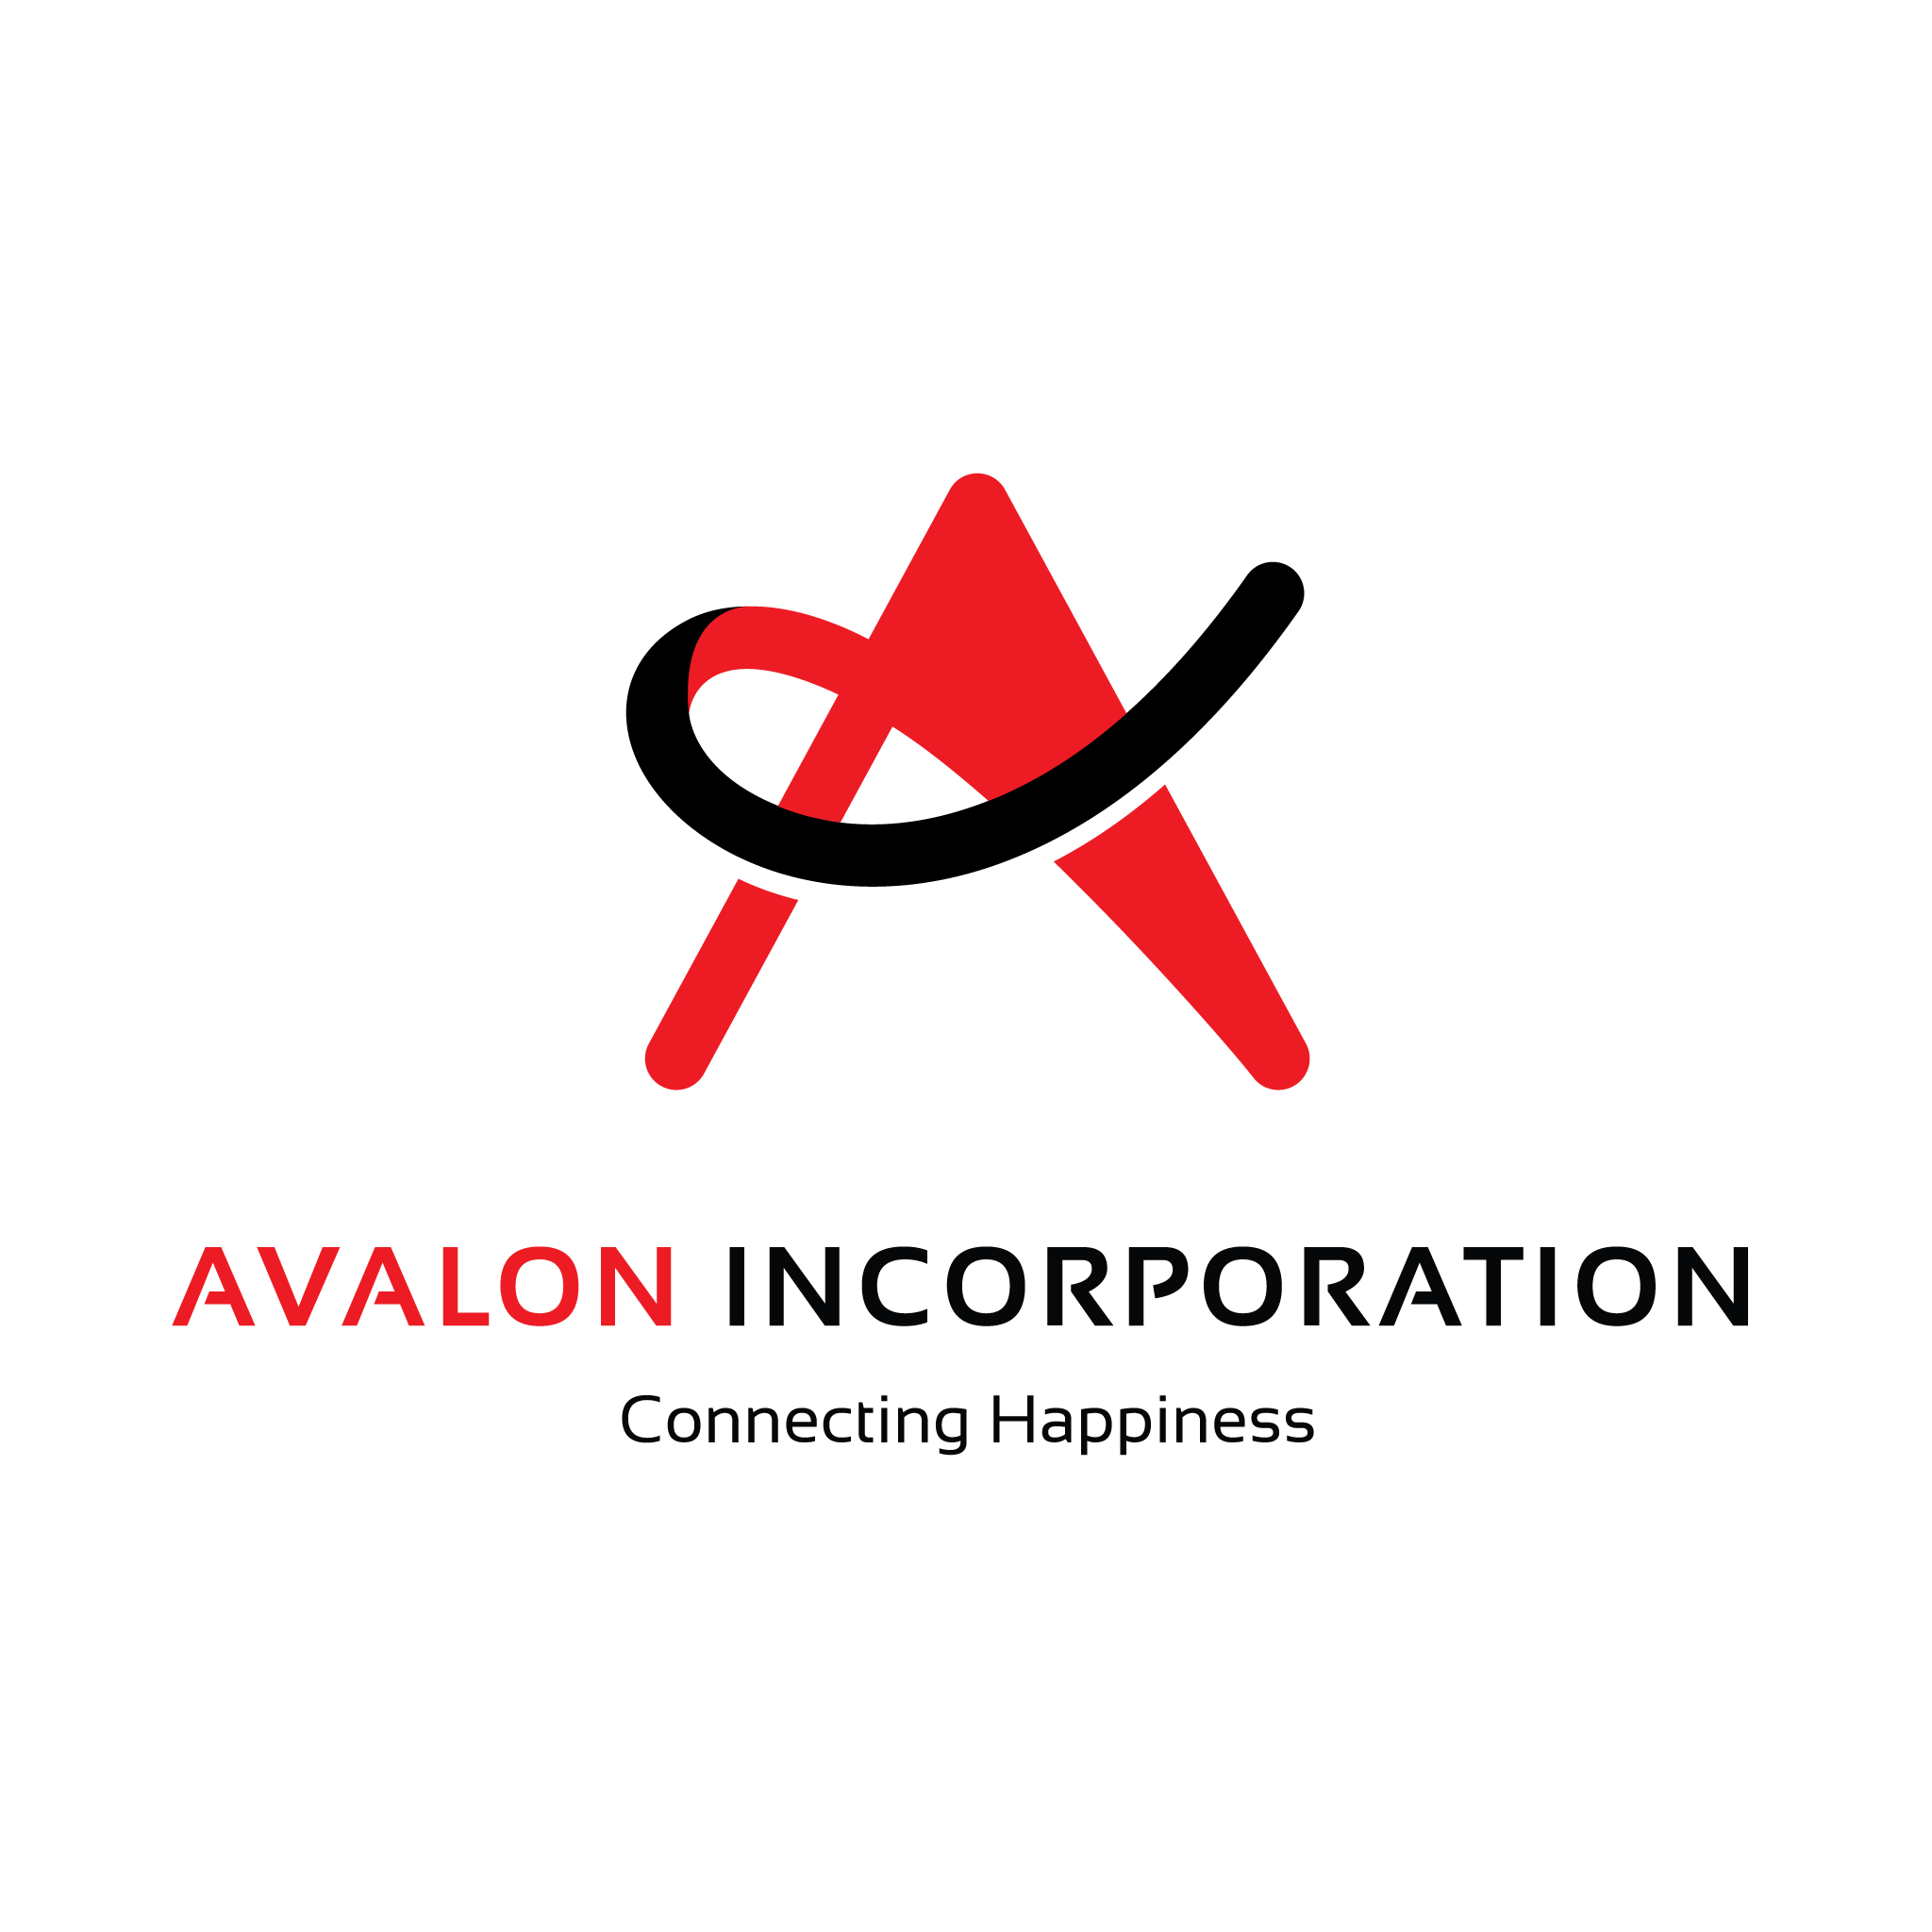 Avalon Incorporation profile on Qualified.One